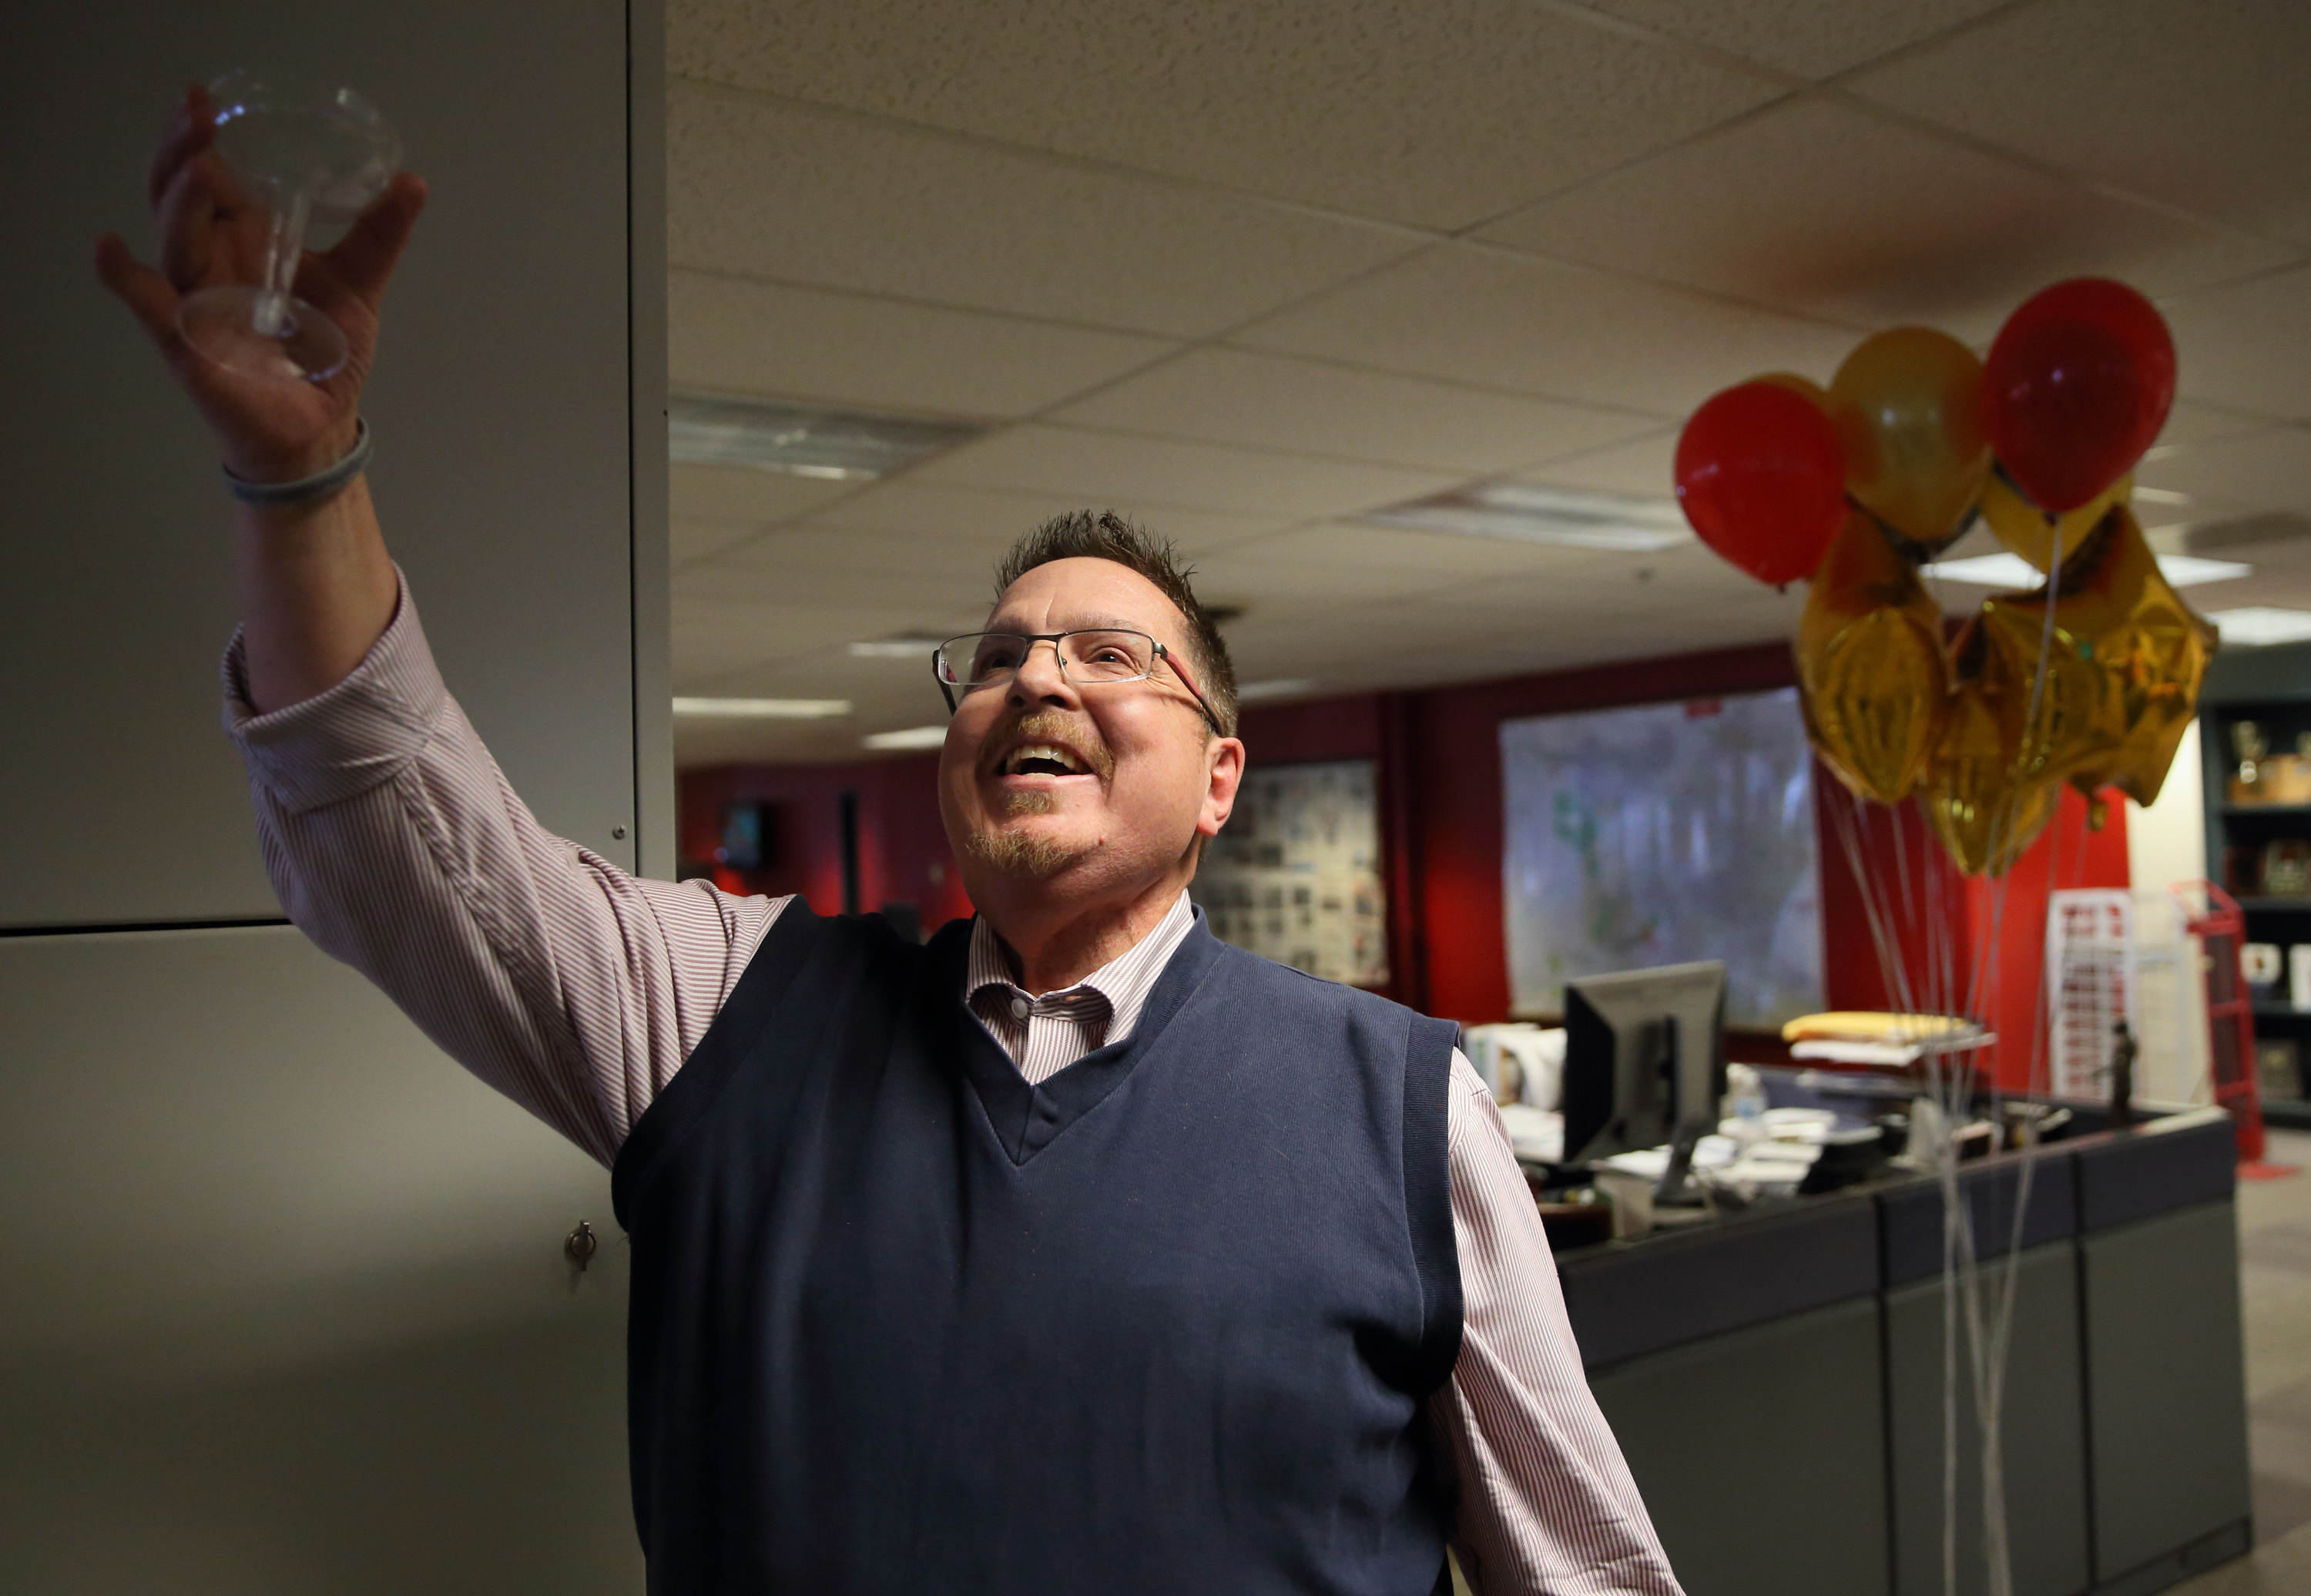 Former Loyola Phoenix staffer Tony Messenger celebrates in the newsroom after learning he won a Pulitzer Prize. Photo courtesy David Carson, St. Louis Post-Dispatch.